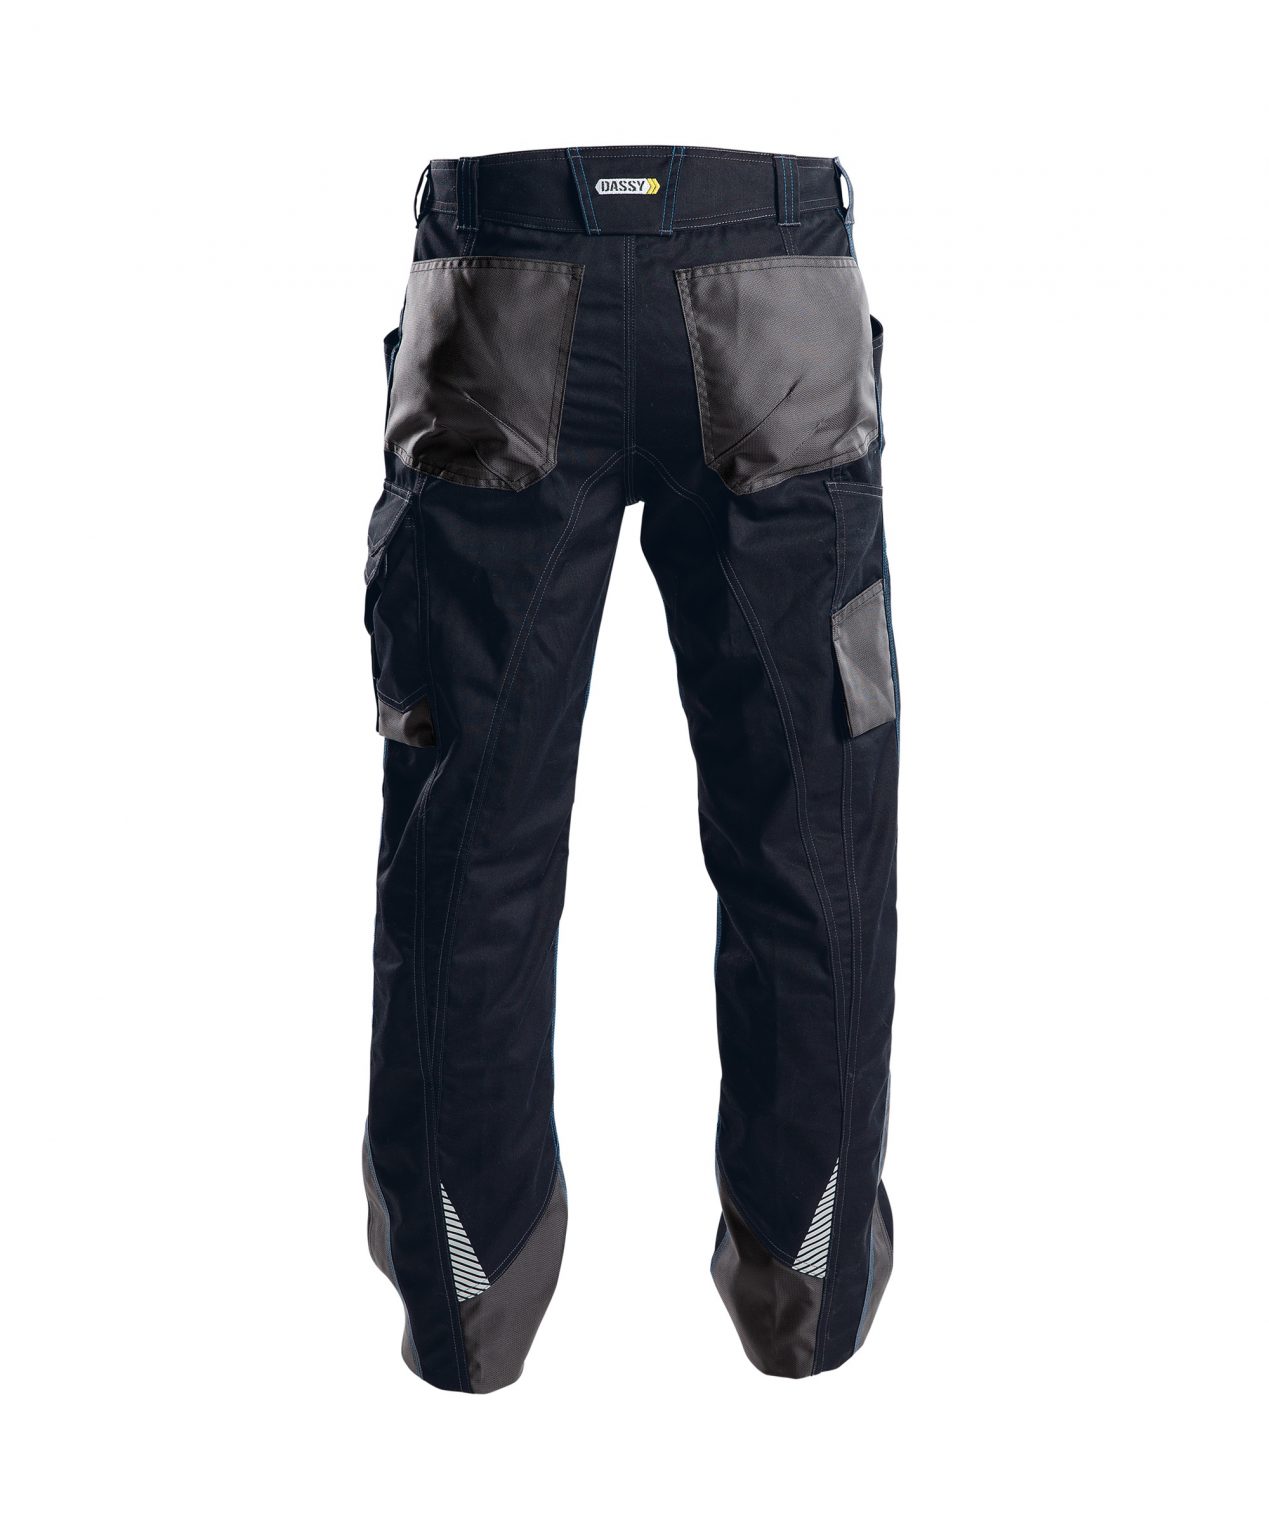 spectrum work trousers midnight blue anthracite grey back